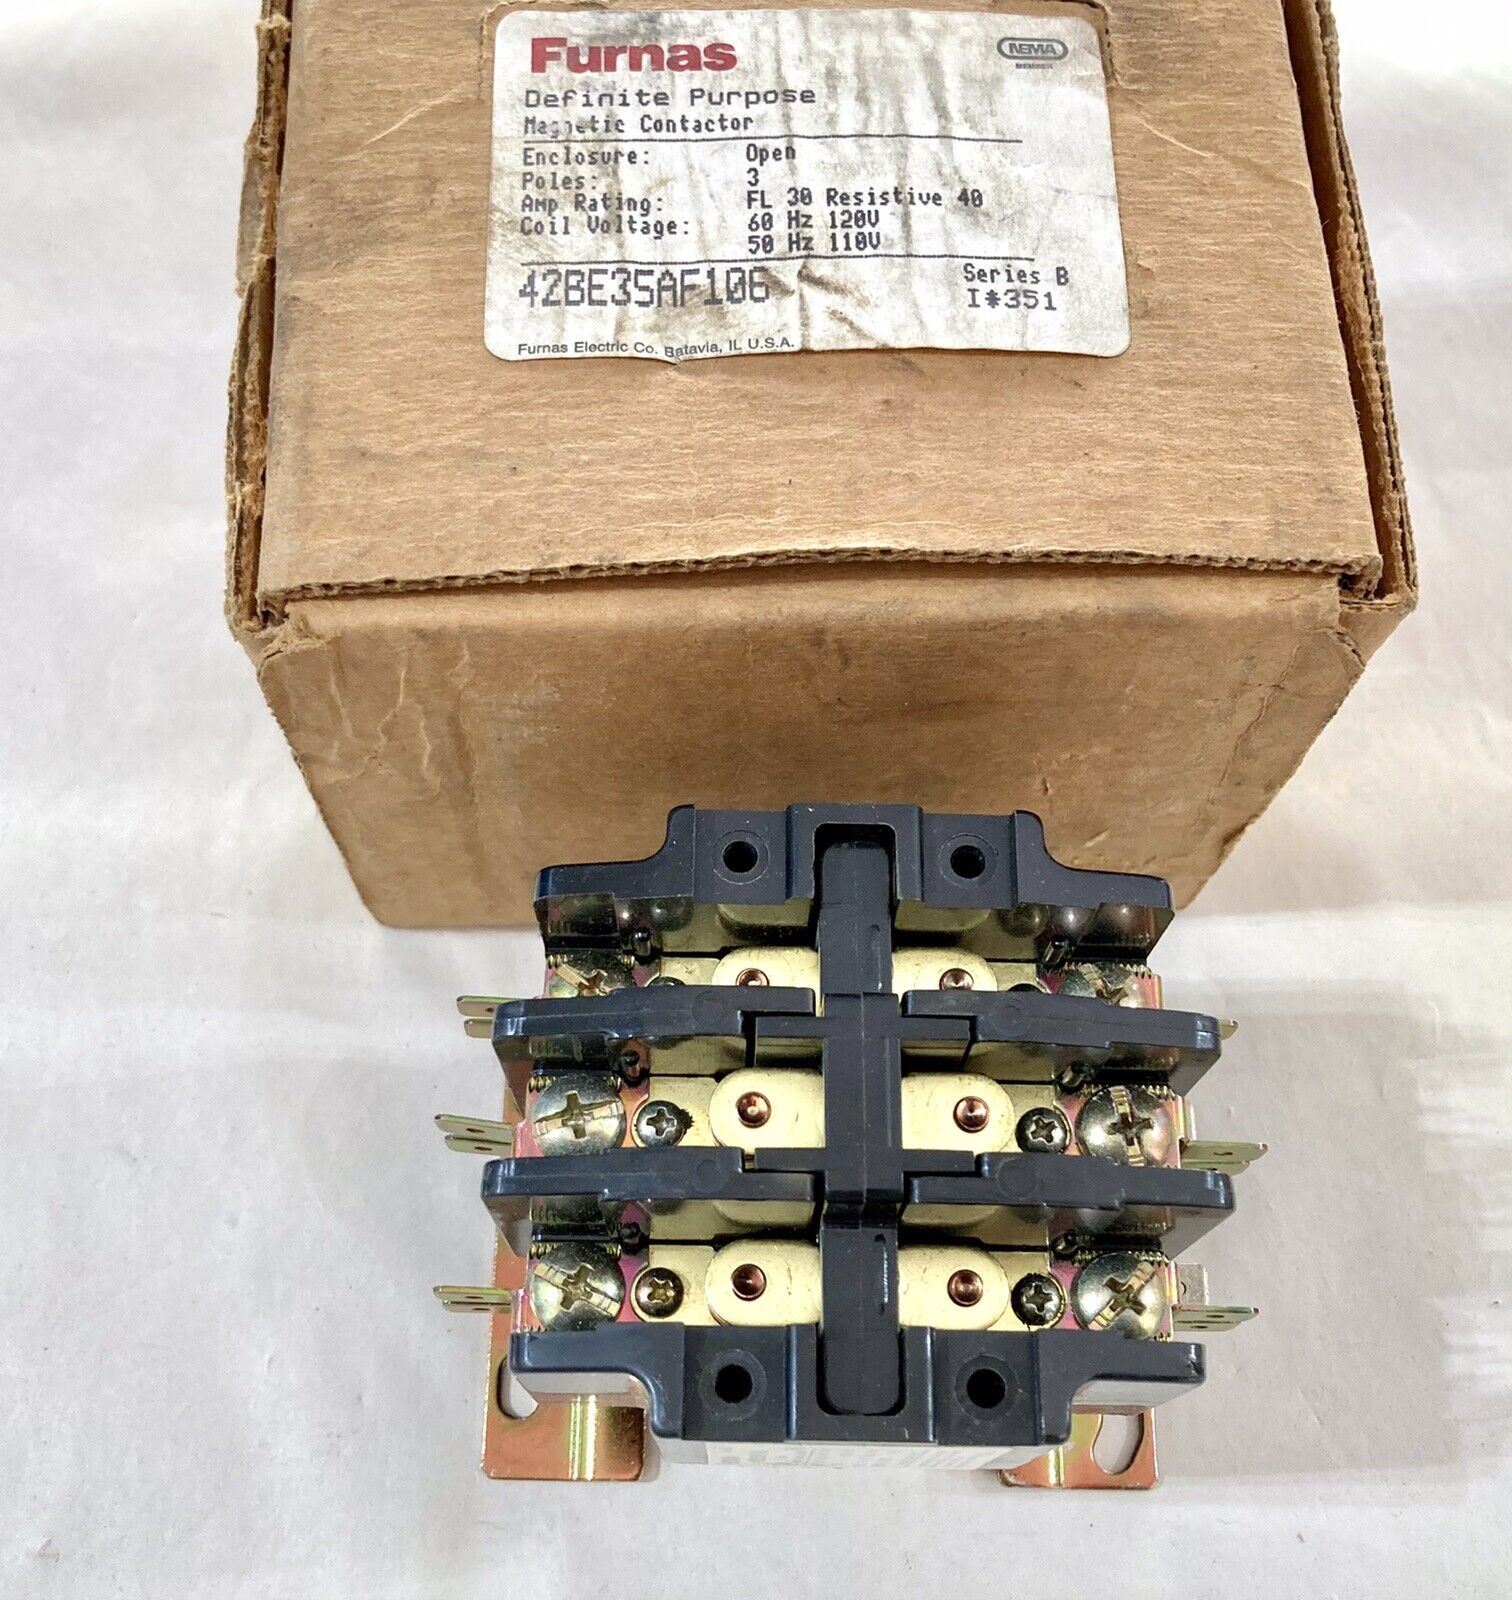 NOS Furnas 42BE35AF106 Definite Purpose Magnetic Contactor New Old Stock